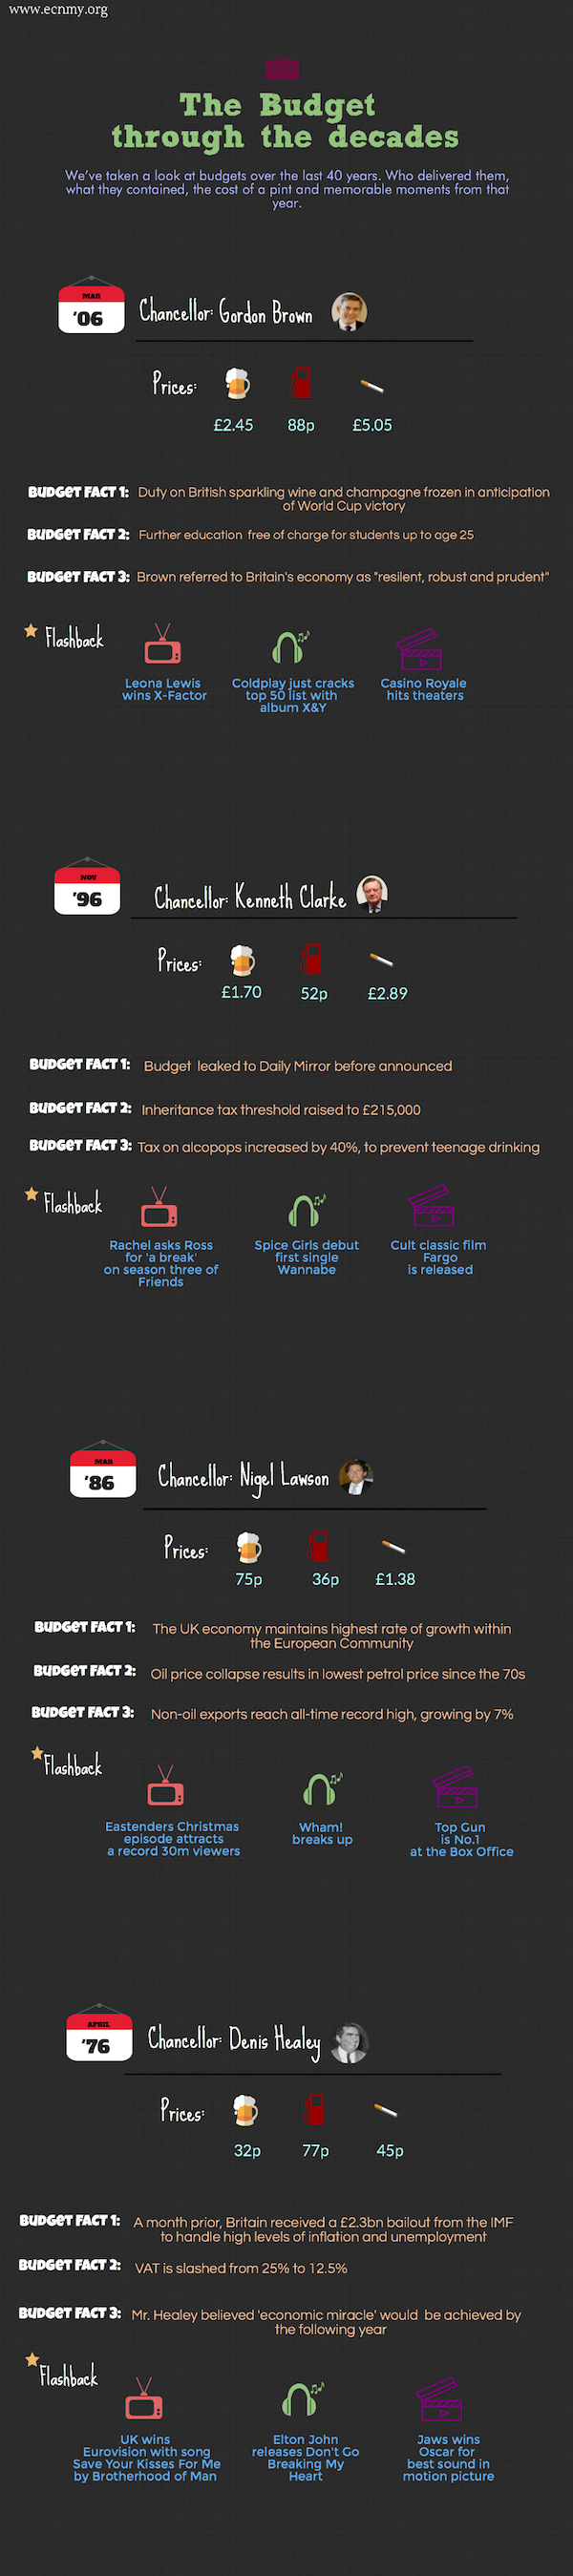 A graphic showing the The Budget through the decades